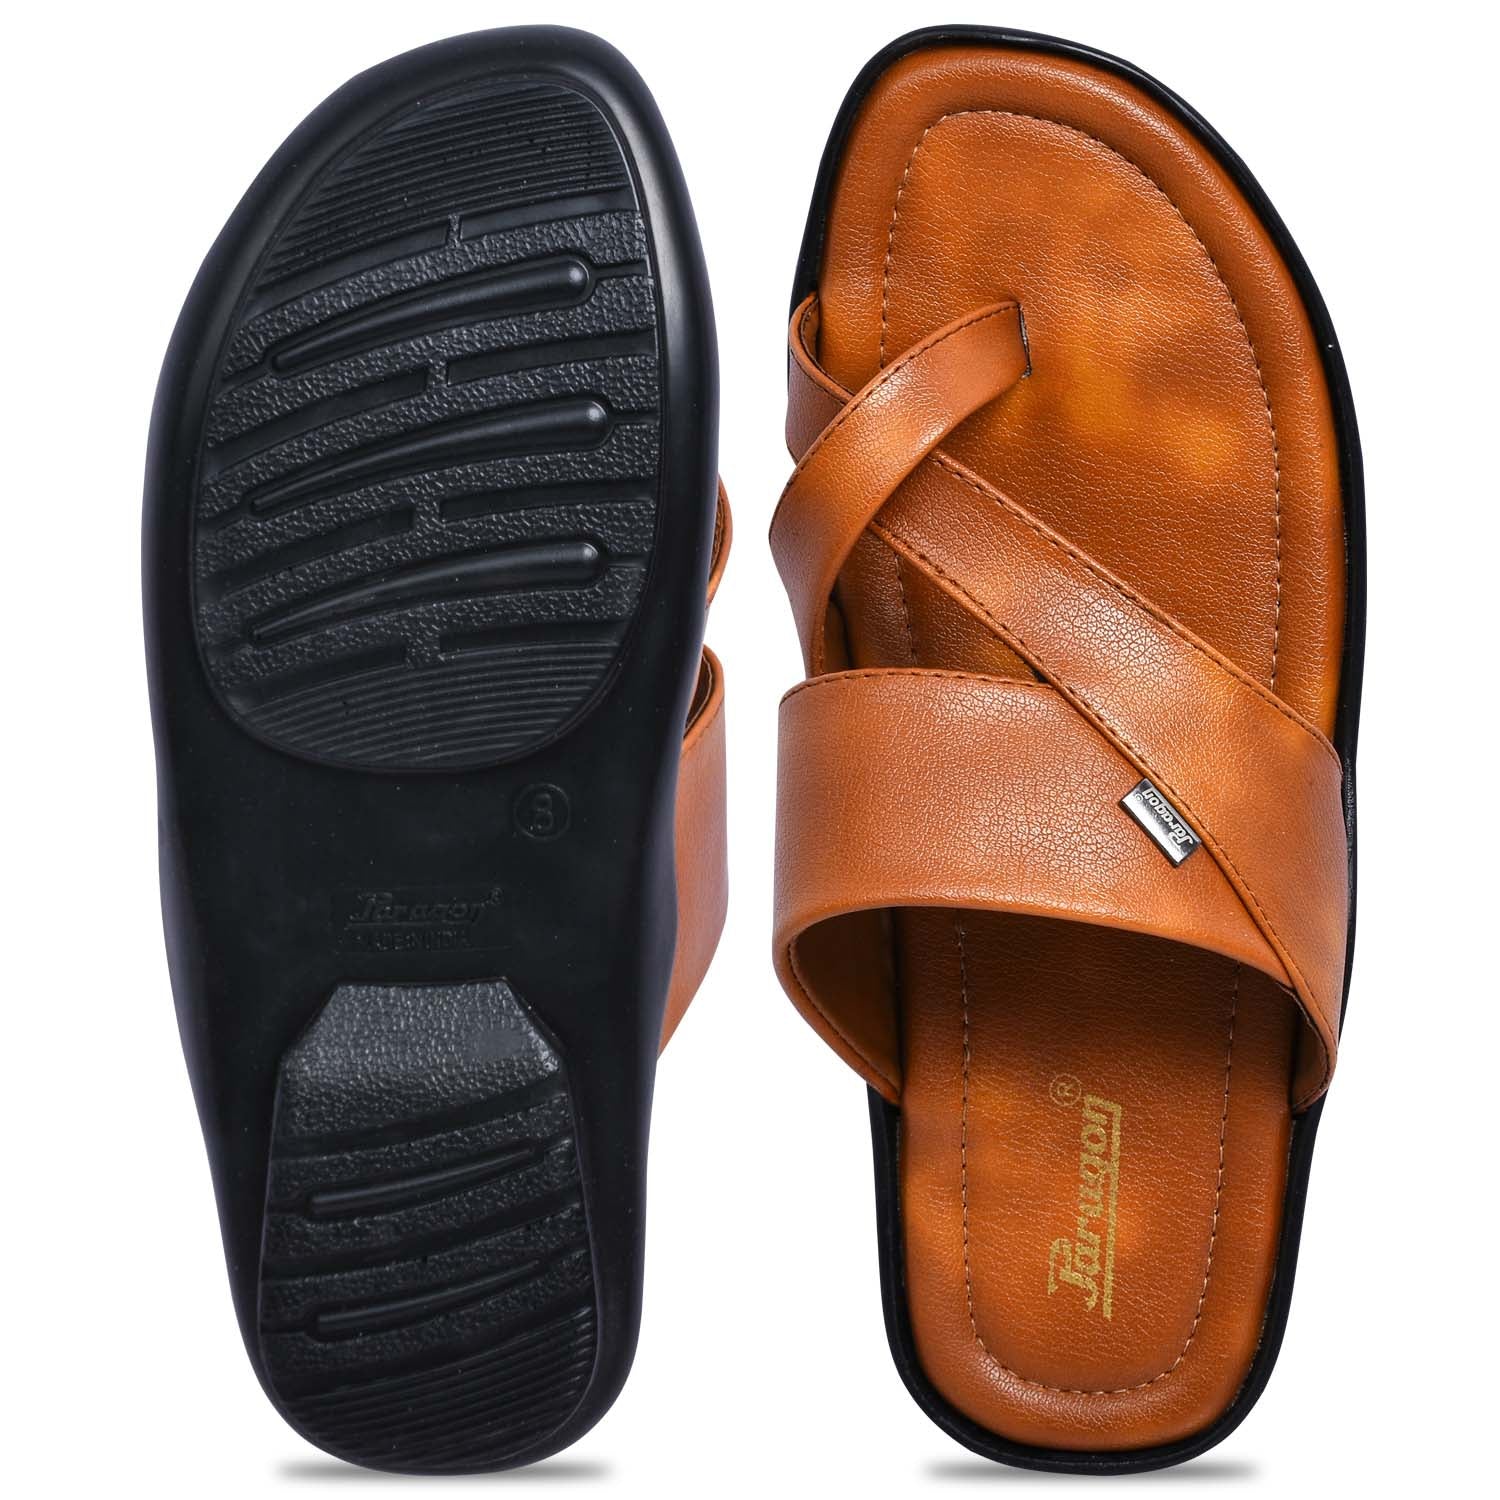 Paragon R4004G Men Stylish Sandals | Comfortable Sandals for Daily Outdoor Use | Casual Formal Sandals with Cushioned Soles